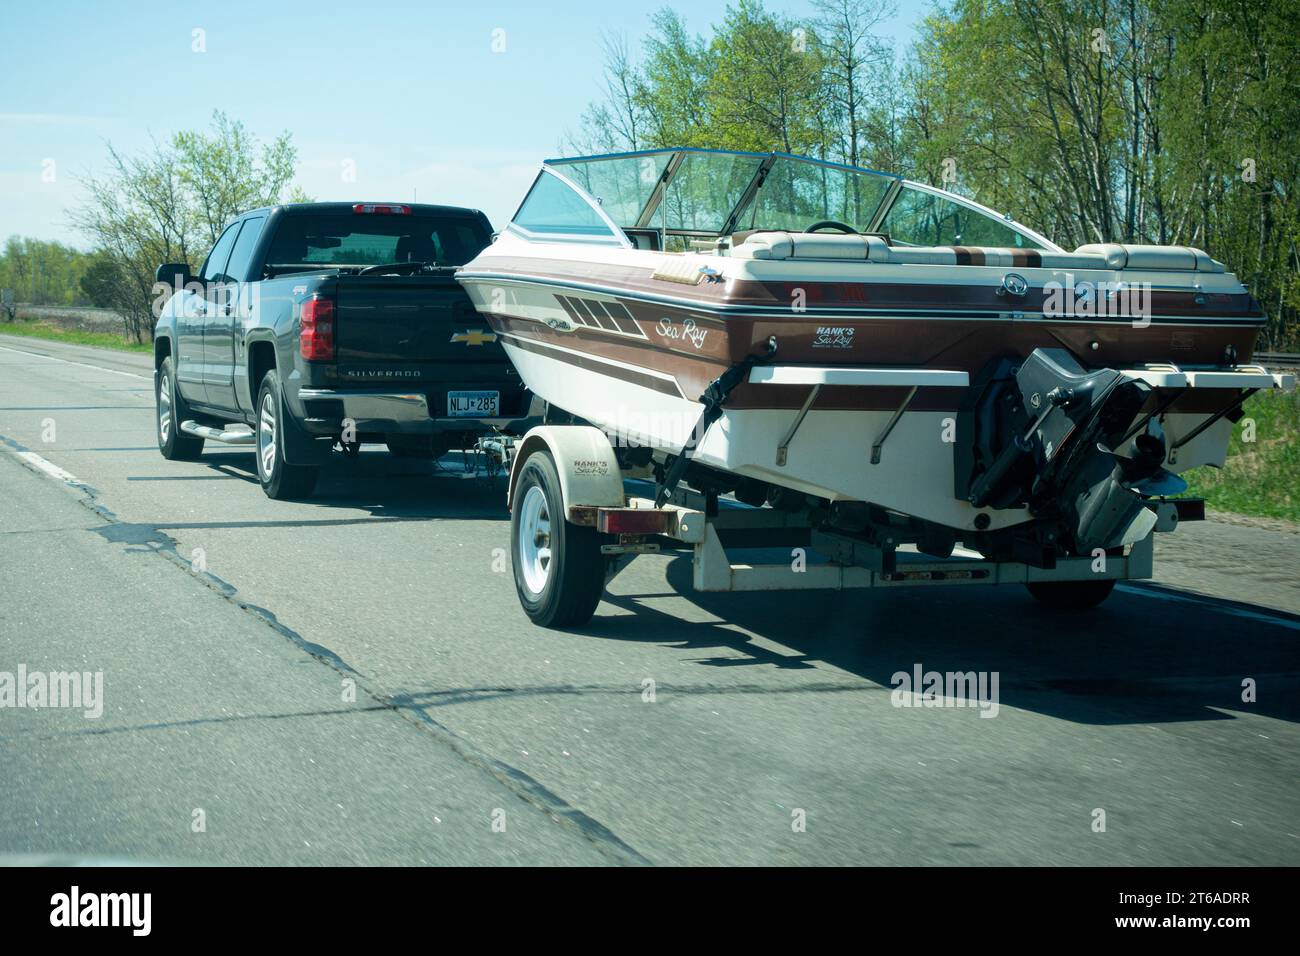 Green Chevy Silverado towing a classic Hank's Sea Ray Seville's speed boat with a powerful inboard motor on the highway. Nisswa Minnesota MN USA Stock Photo